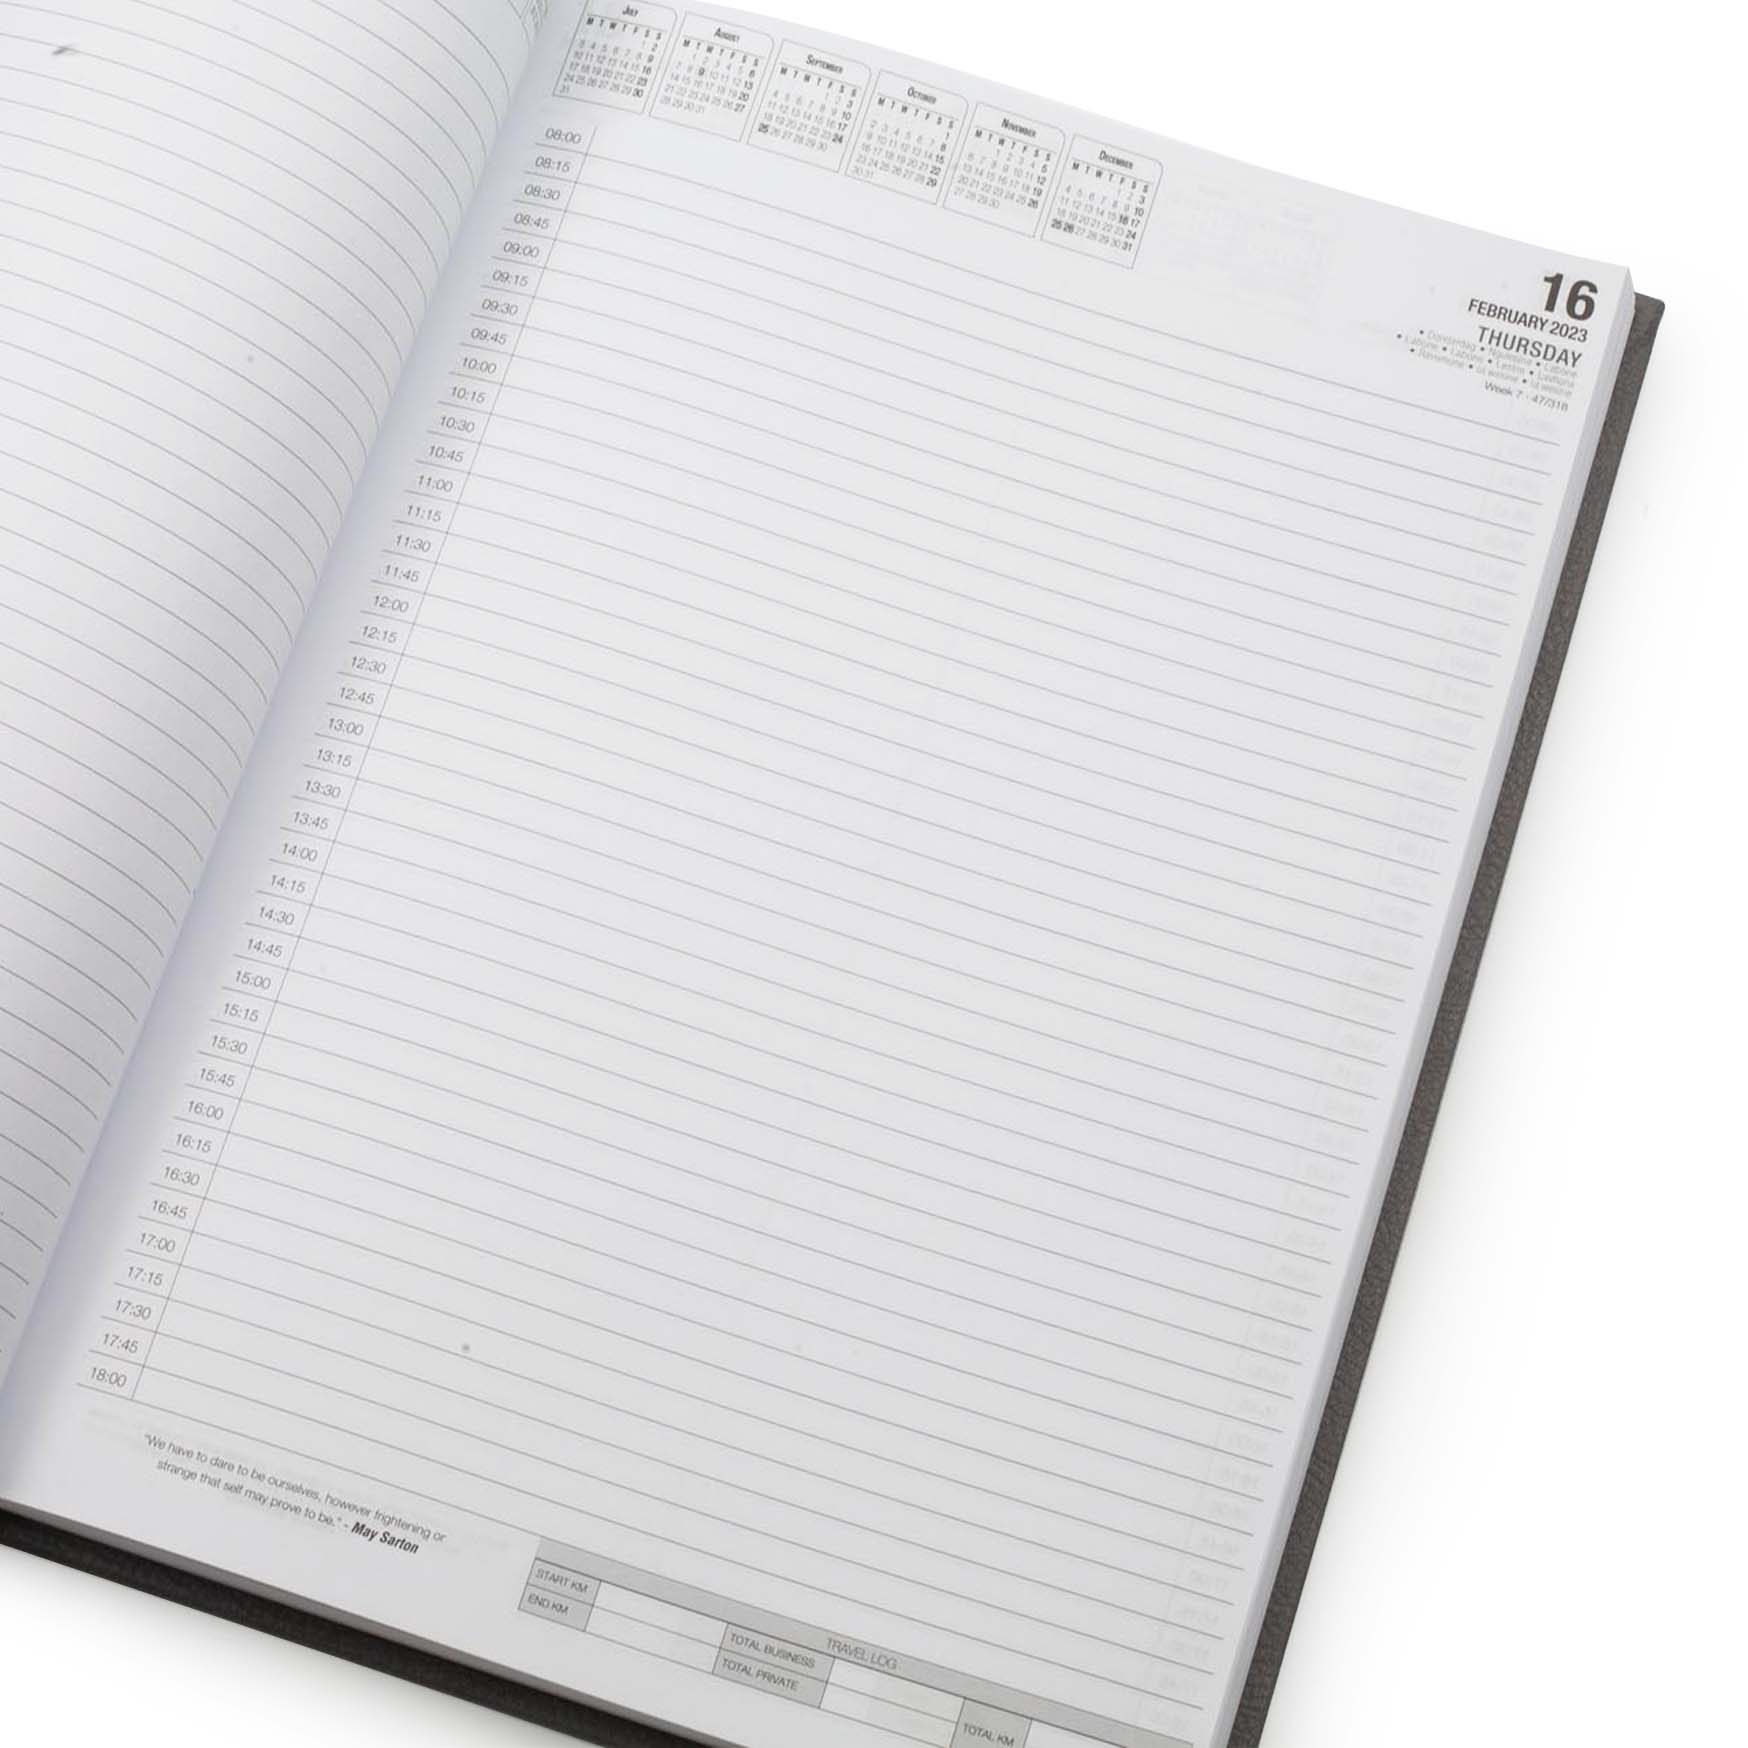 Image shows a daily page in the A4 Nappa 2023 diary